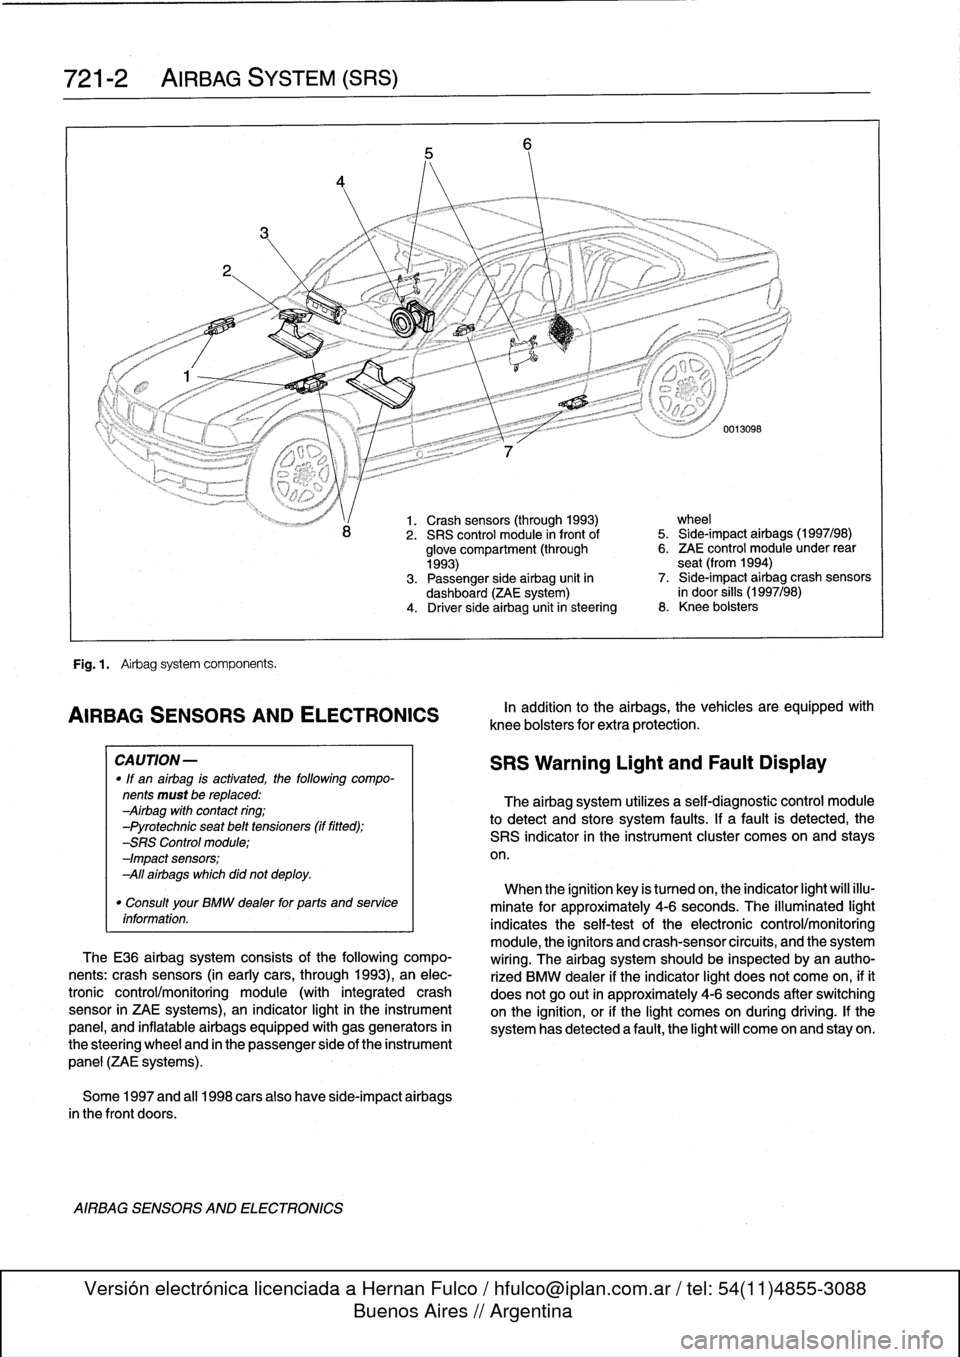 BMW 318i 1997 E36 Repair Manual 
721-2

	

AIRBAG
SYSTEM
(SRS)

Fig
.
1
.

	

Airbag
system
components
.

AIRBAG
SENSORSAND
ELECTRONICS

CA
UTION-

"
If
an
airbag
is
activated,
the
following
compo-
nents
must
be
replaced
:
Airbag
wi